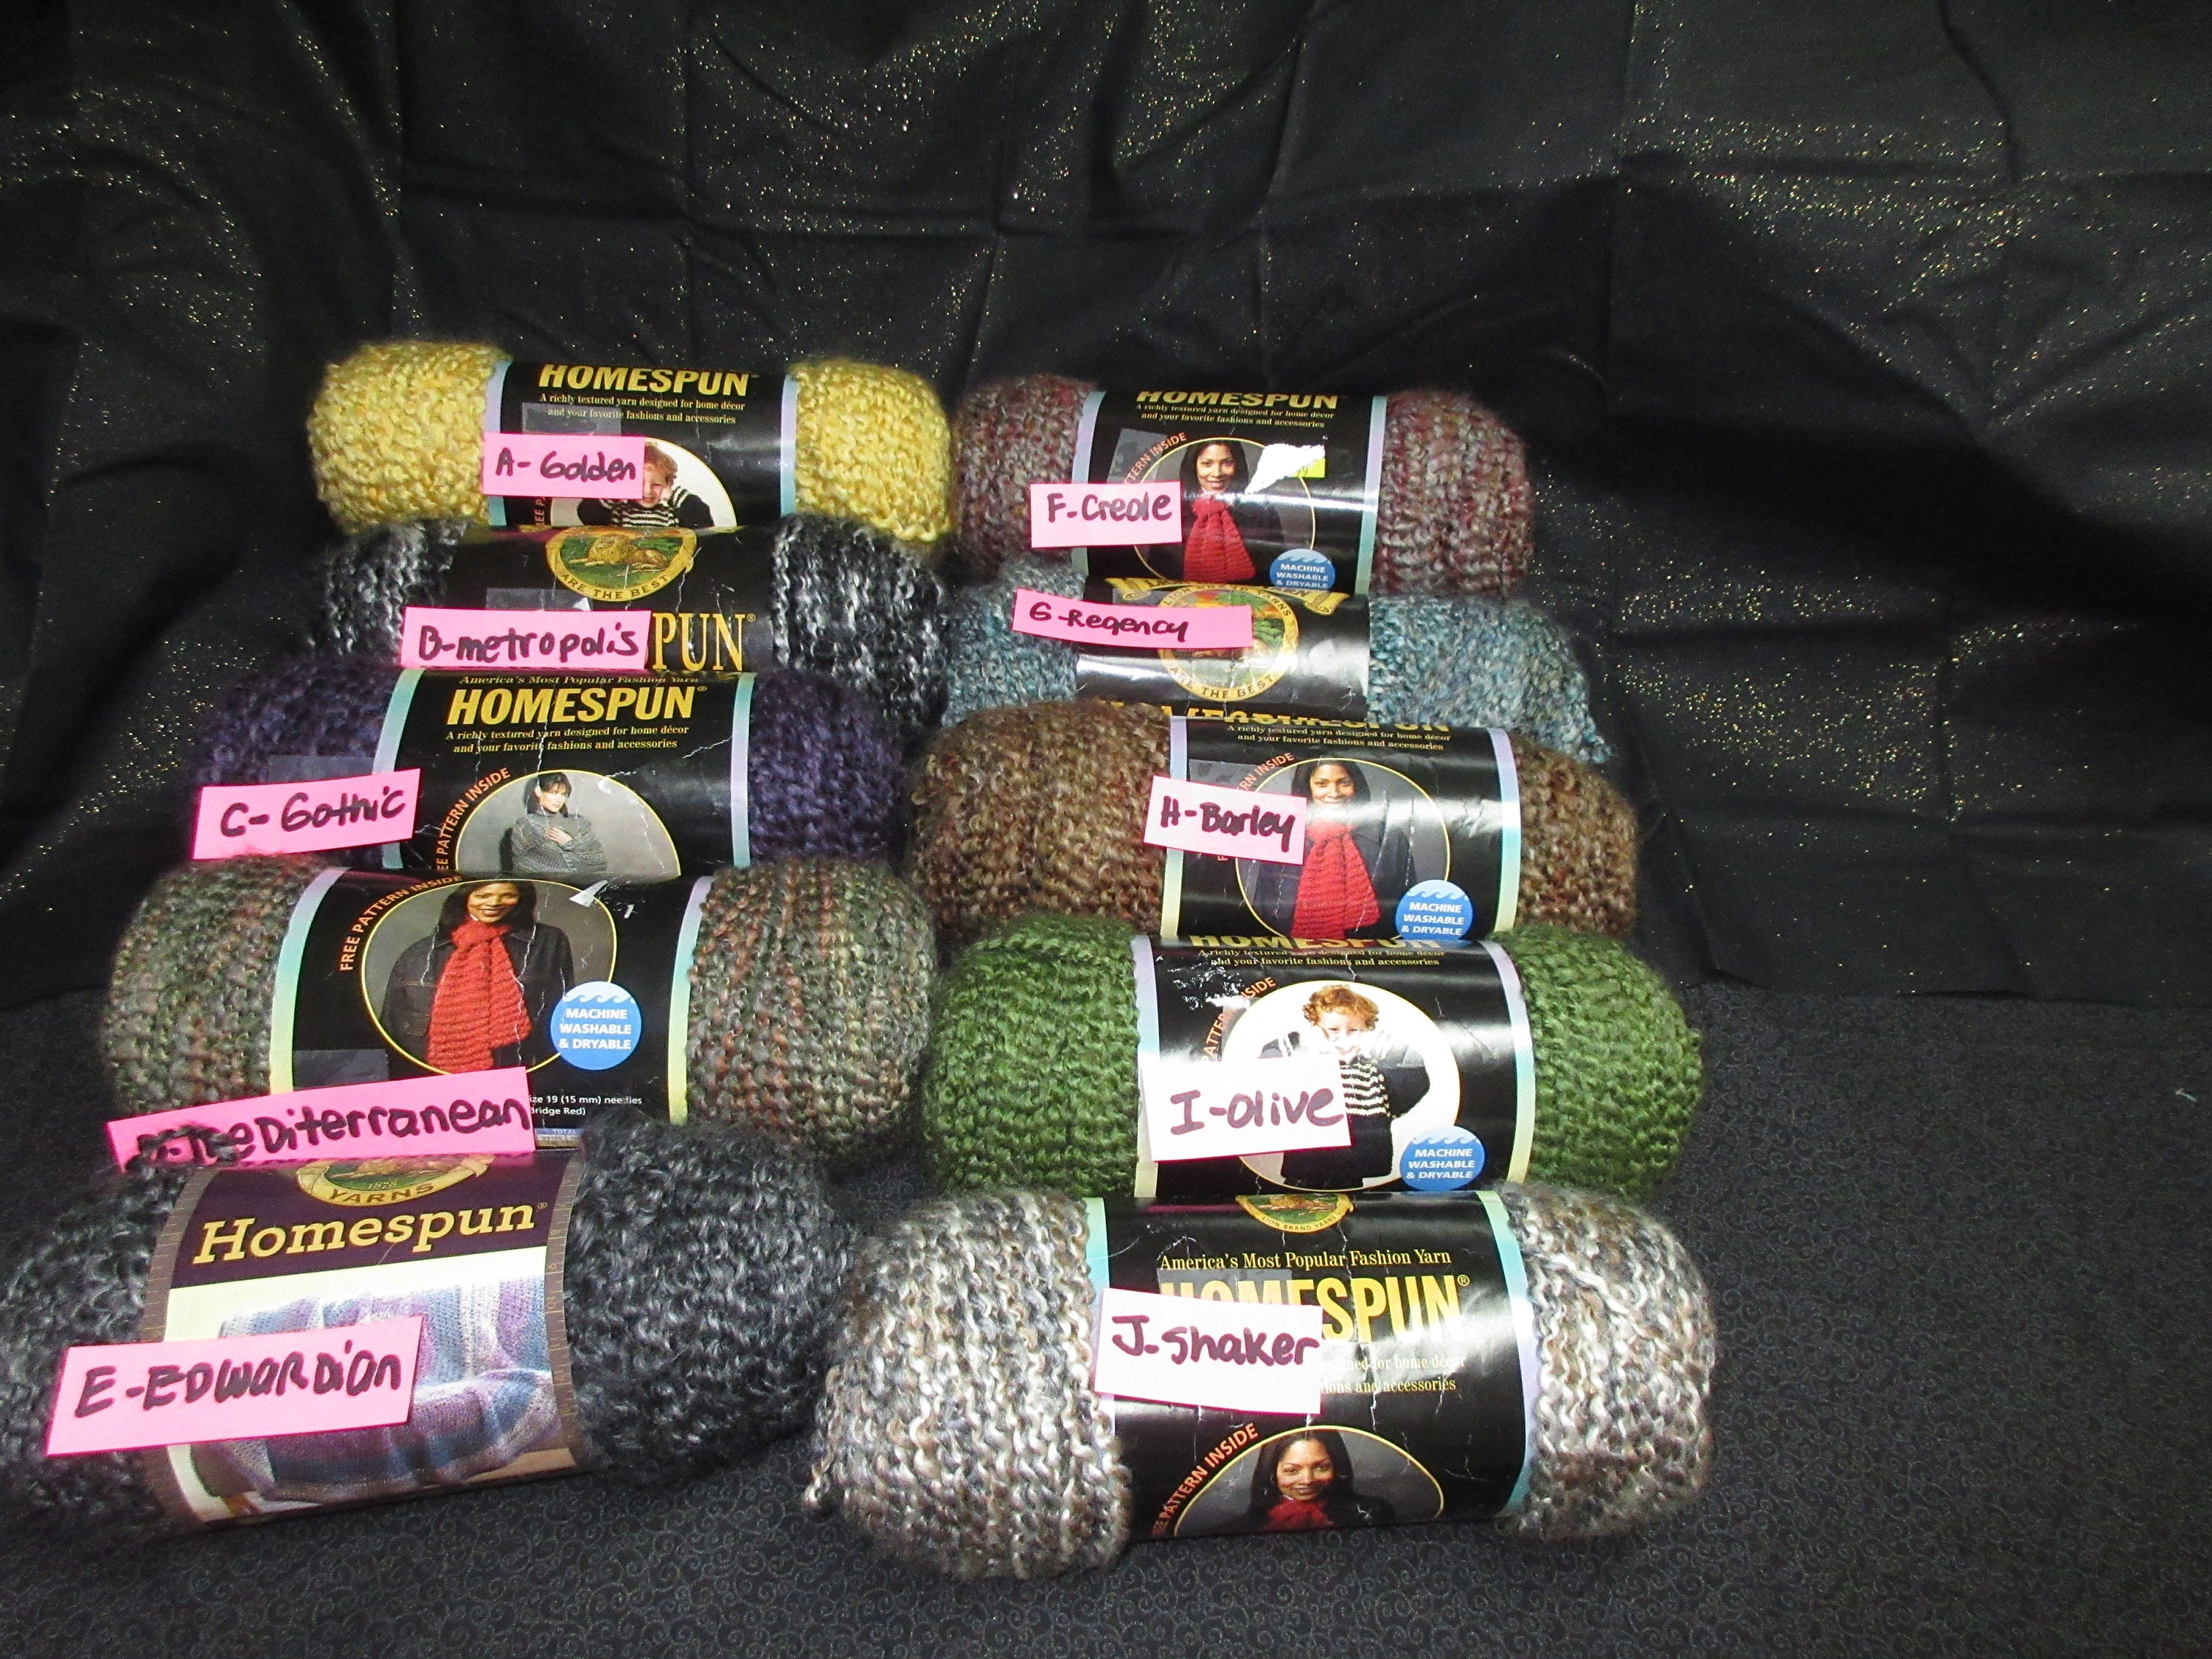 Lion Brand, Office, Lion Brand Homespun Yarn 3 Skeins Colonial Color